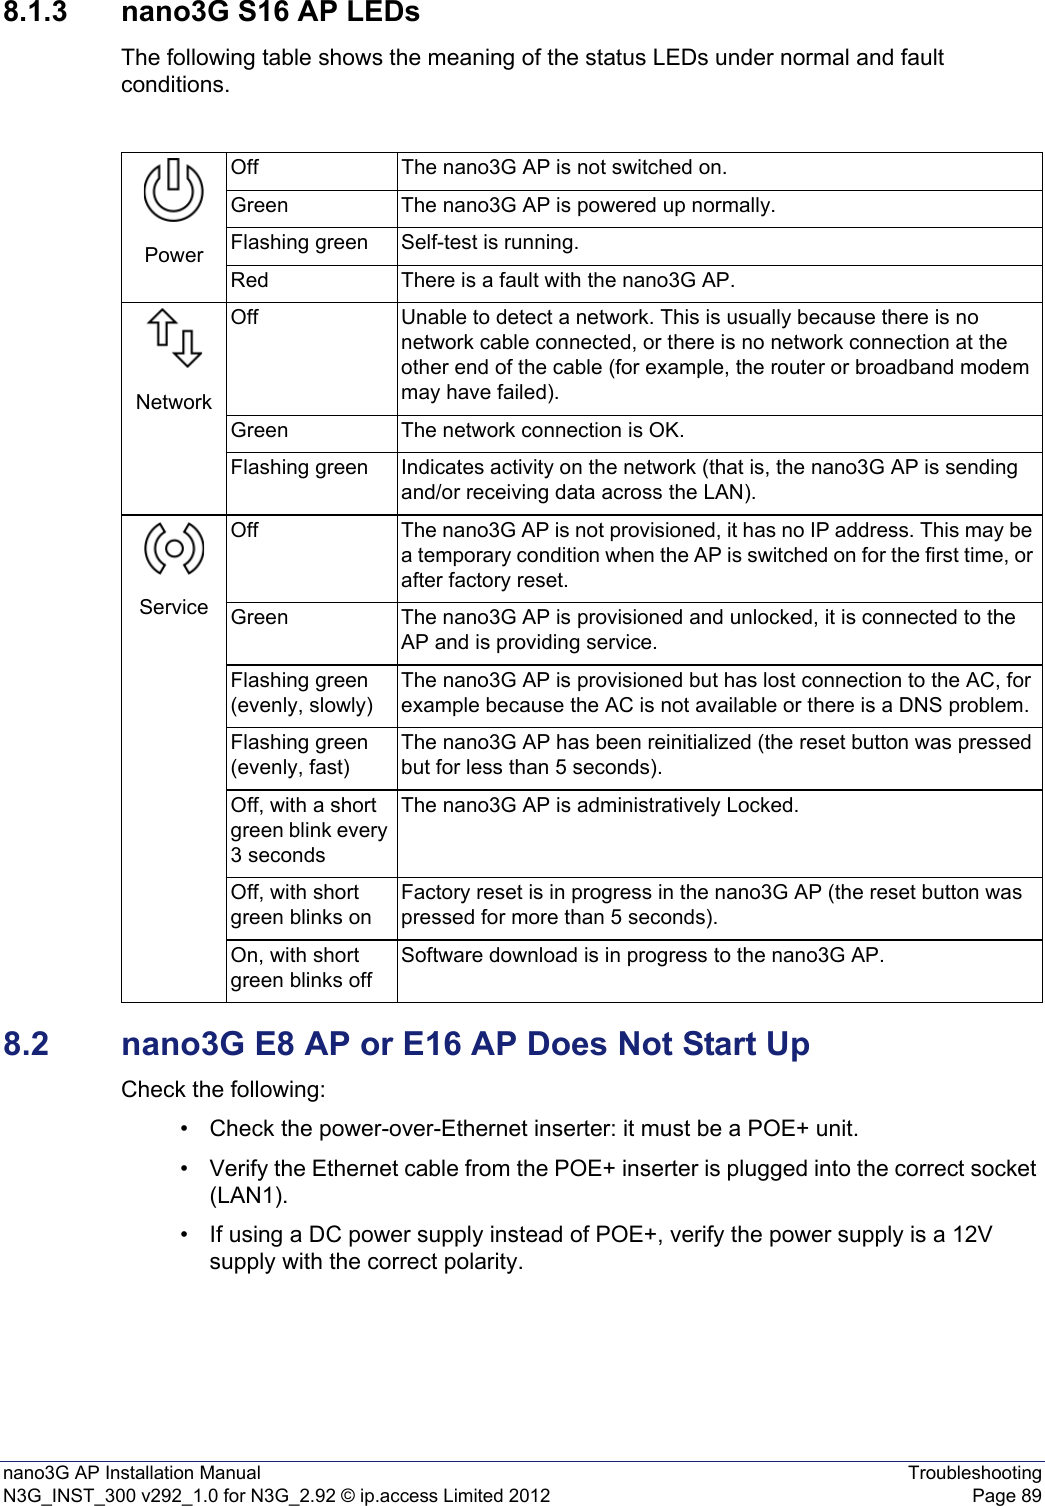 nano3G AP Installation Manual TroubleshootingN3G_INST_300 v292_1.0 for N3G_2.92 © ip.access Limited 2012 Page 898.1.3 nano3G S16 AP LEDsThe following table shows the meaning of the status LEDs under normal and fault conditions.8.2 nano3G E8 AP or E16 AP Does Not Start UpCheck the following:• Check the power-over-Ethernet inserter: it must be a POE+ unit.• Verify the Ethernet cable from the POE+ inserter is plugged into the correct socket (LAN1).• If using a DC power supply instead of POE+, verify the power supply is a 12V supply with the correct polarity.PowerOff The nano3G AP is not switched on.Green The nano3G AP is powered up normally.Flashing green Self-test is running.Red There is a fault with the nano3G AP.NetworkOff Unable to detect a network. This is usually because there is no network cable connected, or there is no network connection at the other end of the cable (for example, the router or broadband modem may have failed).Green The network connection is OK.Flashing green Indicates activity on the network (that is, the nano3G AP is sending and/or receiving data across the LAN).ServiceOff The nano3G AP is not provisioned, it has no IP address. This may be a temporary condition when the AP is switched on for the first time, or after factory reset.Green The nano3G AP is provisioned and unlocked, it is connected to the AP and is providing service.Flashing green (evenly, slowly)The nano3G AP is provisioned but has lost connection to the AC, for example because the AC is not available or there is a DNS problem.Flashing green (evenly, fast)The nano3G AP has been reinitialized (the reset button was pressed but for less than 5 seconds).Off, with a short green blink every 3 secondsThe nano3G AP is administratively Locked. Off, with short green blinks onFactory reset is in progress in the nano3G AP (the reset button was pressed for more than 5 seconds).On, with short green blinks offSoftware download is in progress to the nano3G AP.